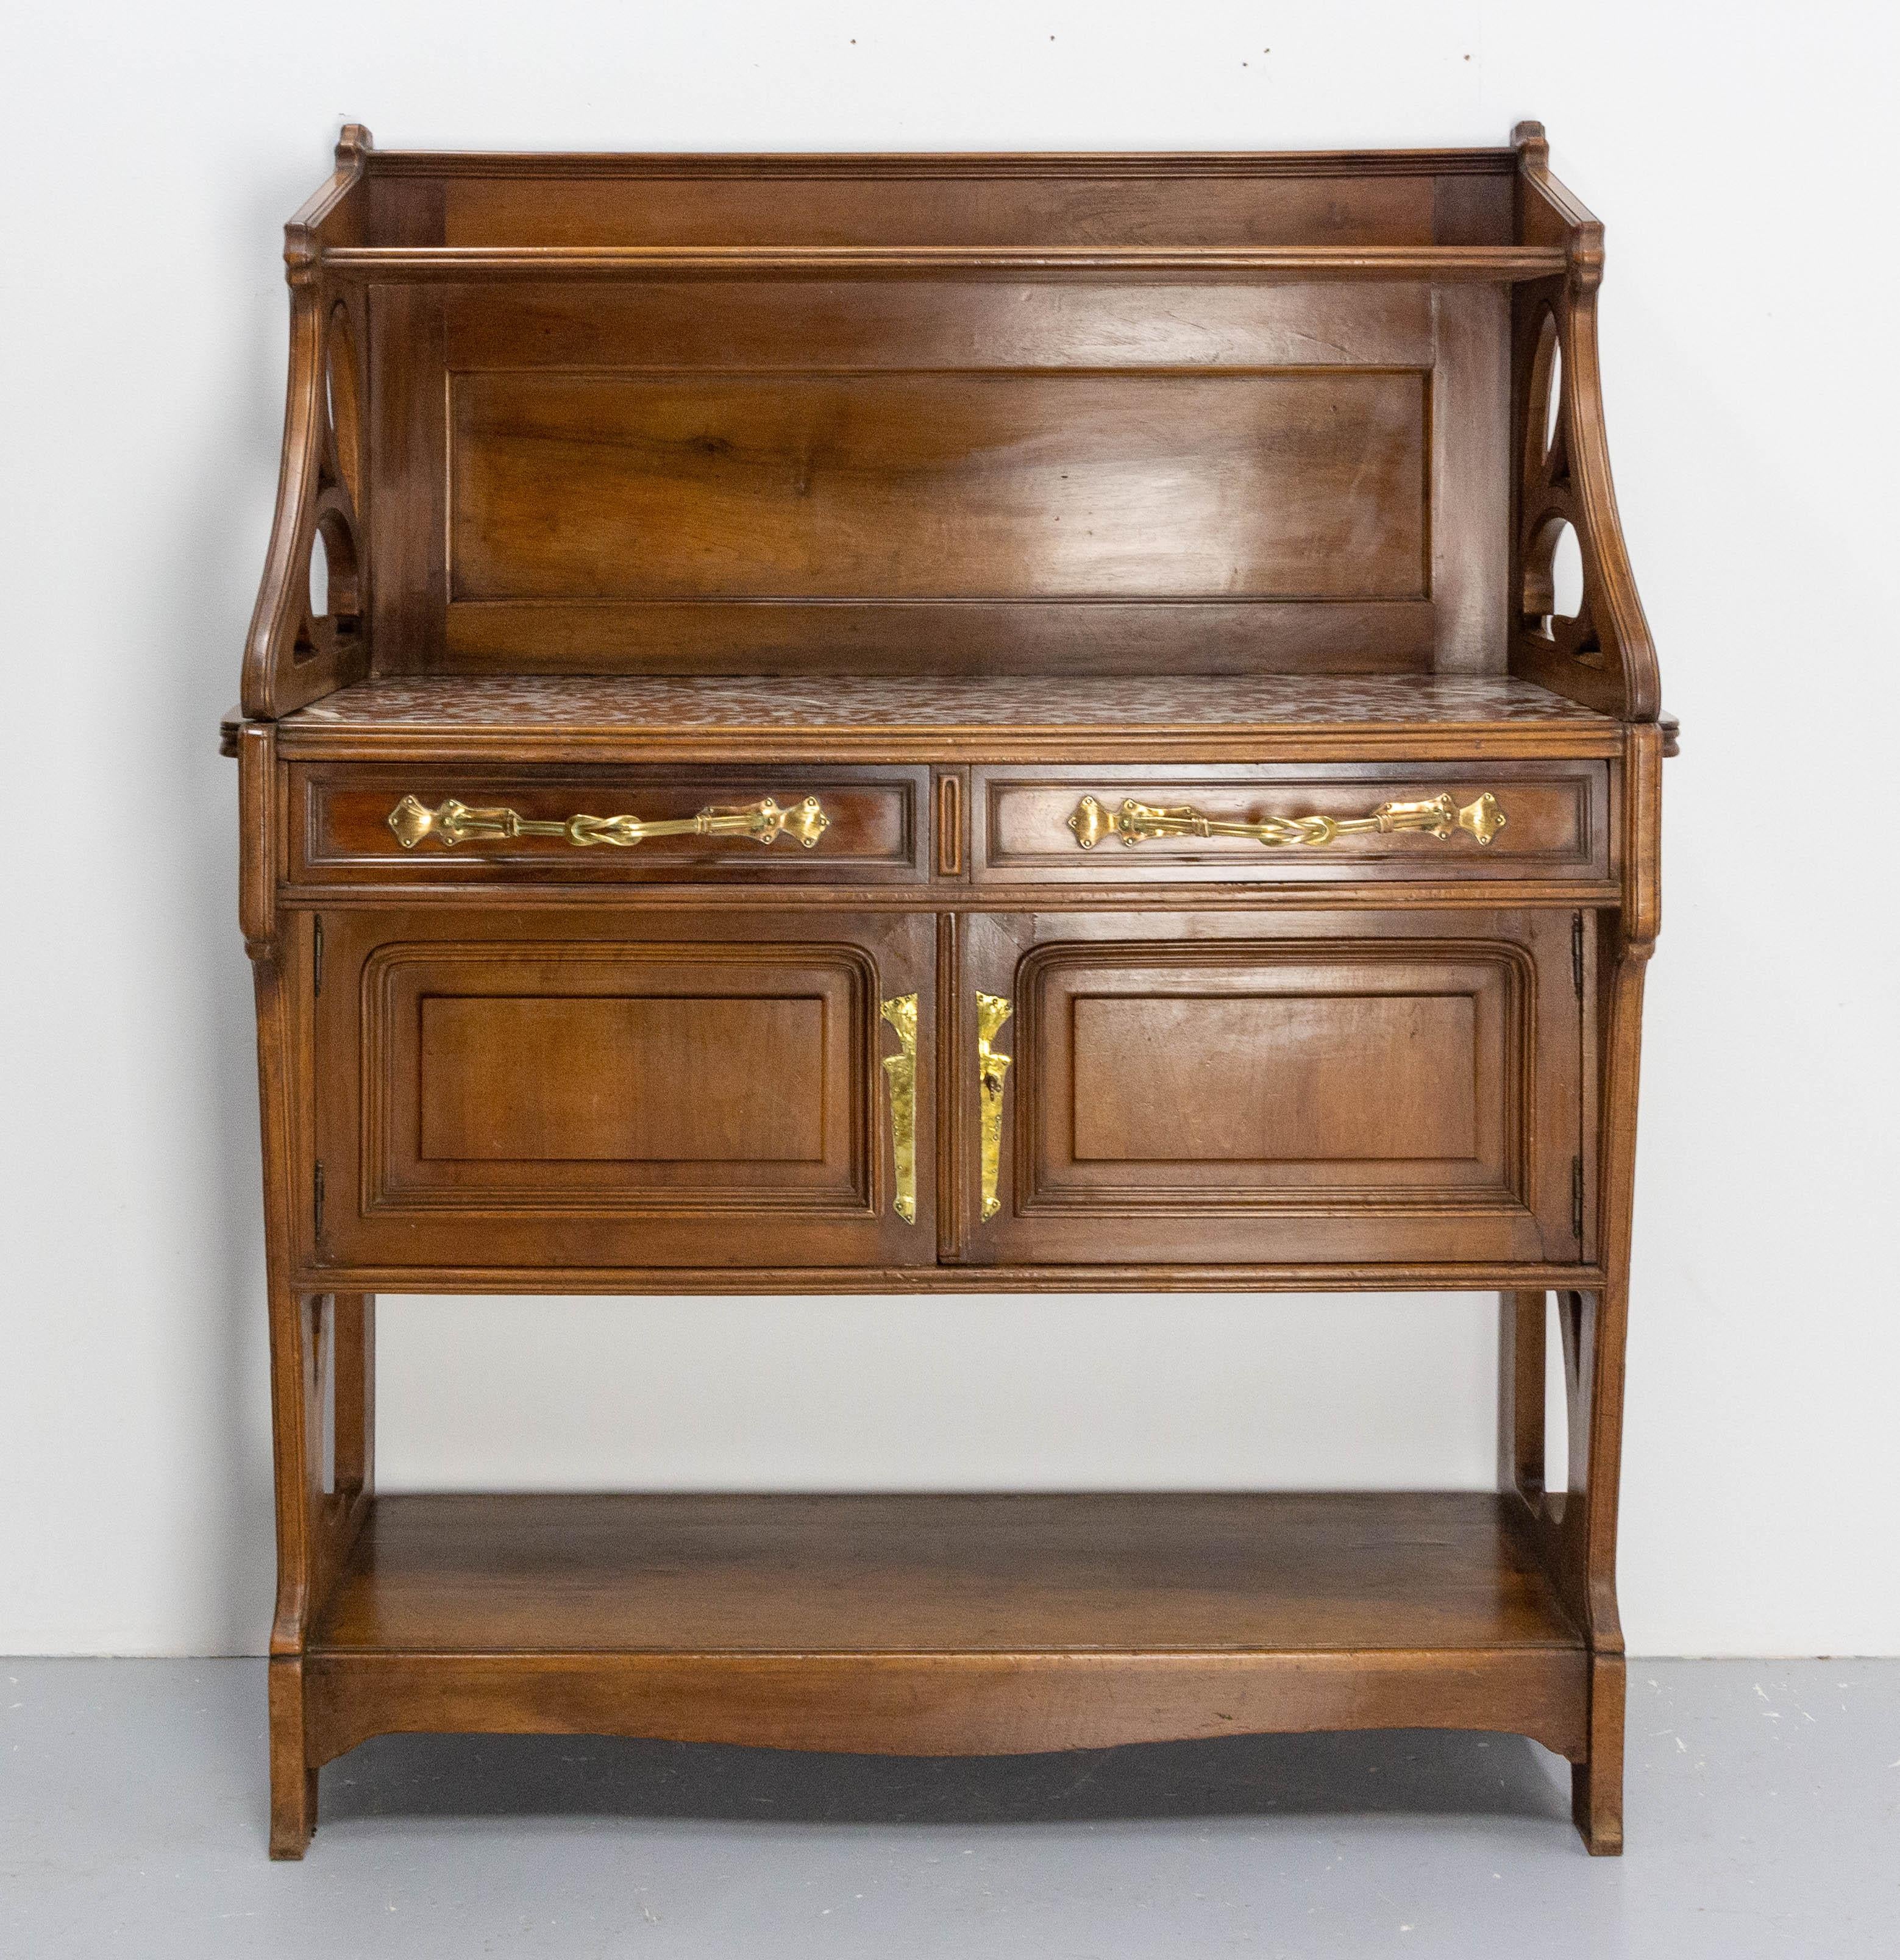 Art Nouveau French console dessert or little buffet, circa 1910.
Marble, walnut and brass
the curved lines of this buffet are typical of the Art Nouveau period, beautifully illustrated by Antonio Gaudí.
The marble was broken and then glued,